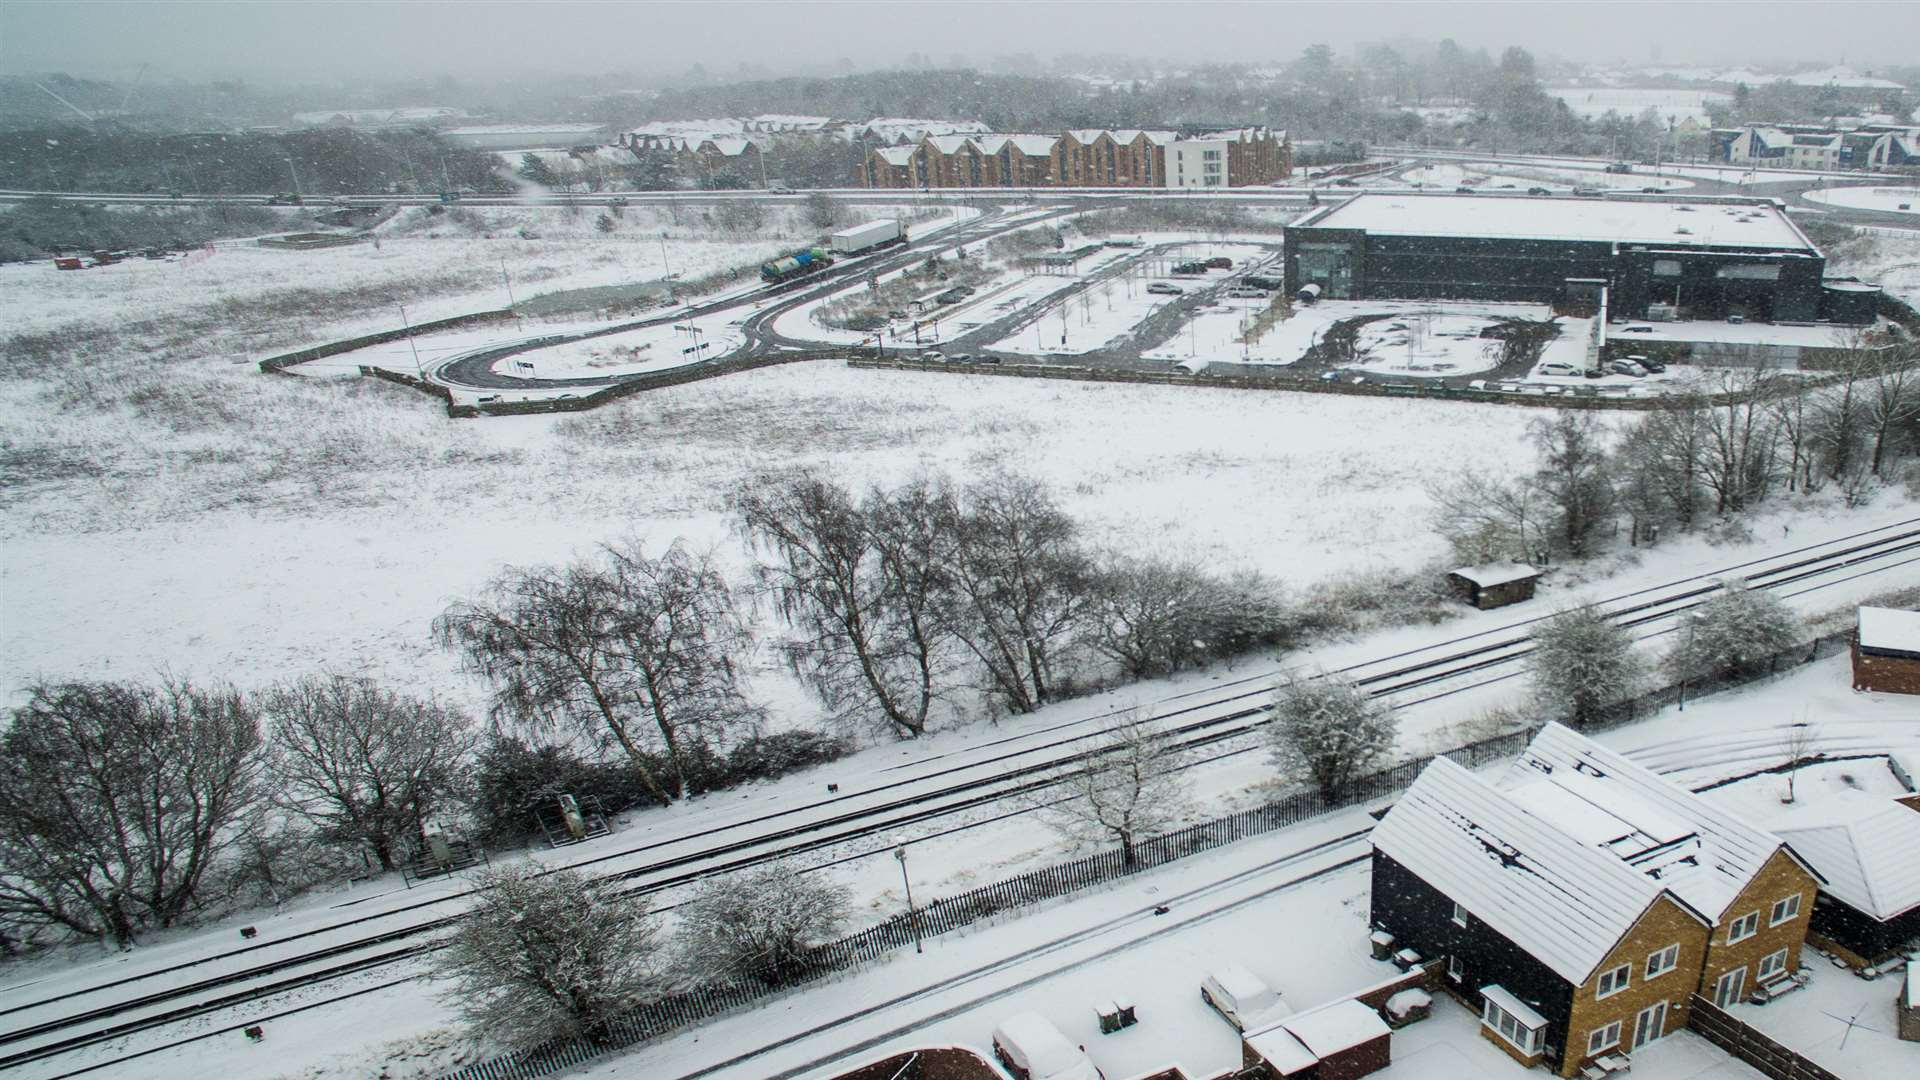 A snow-bound Ashford from the skies. Picture: Skyreel